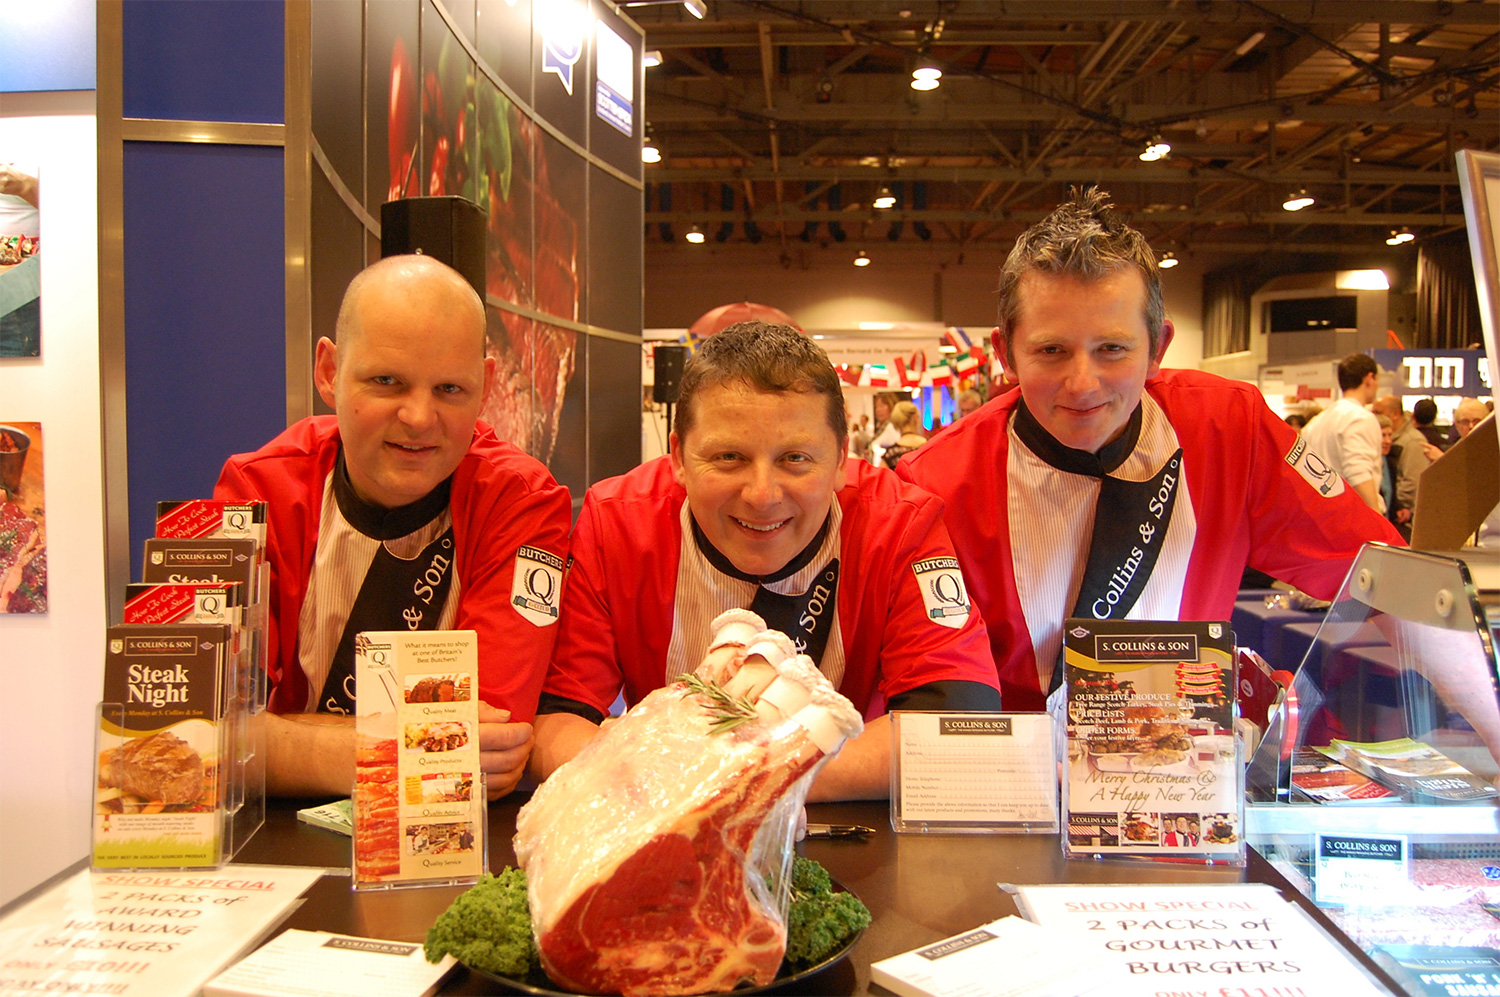 S Collins & Son won the title of 'Scottish Butcher’s Shop of the Year' at the annual event held this month